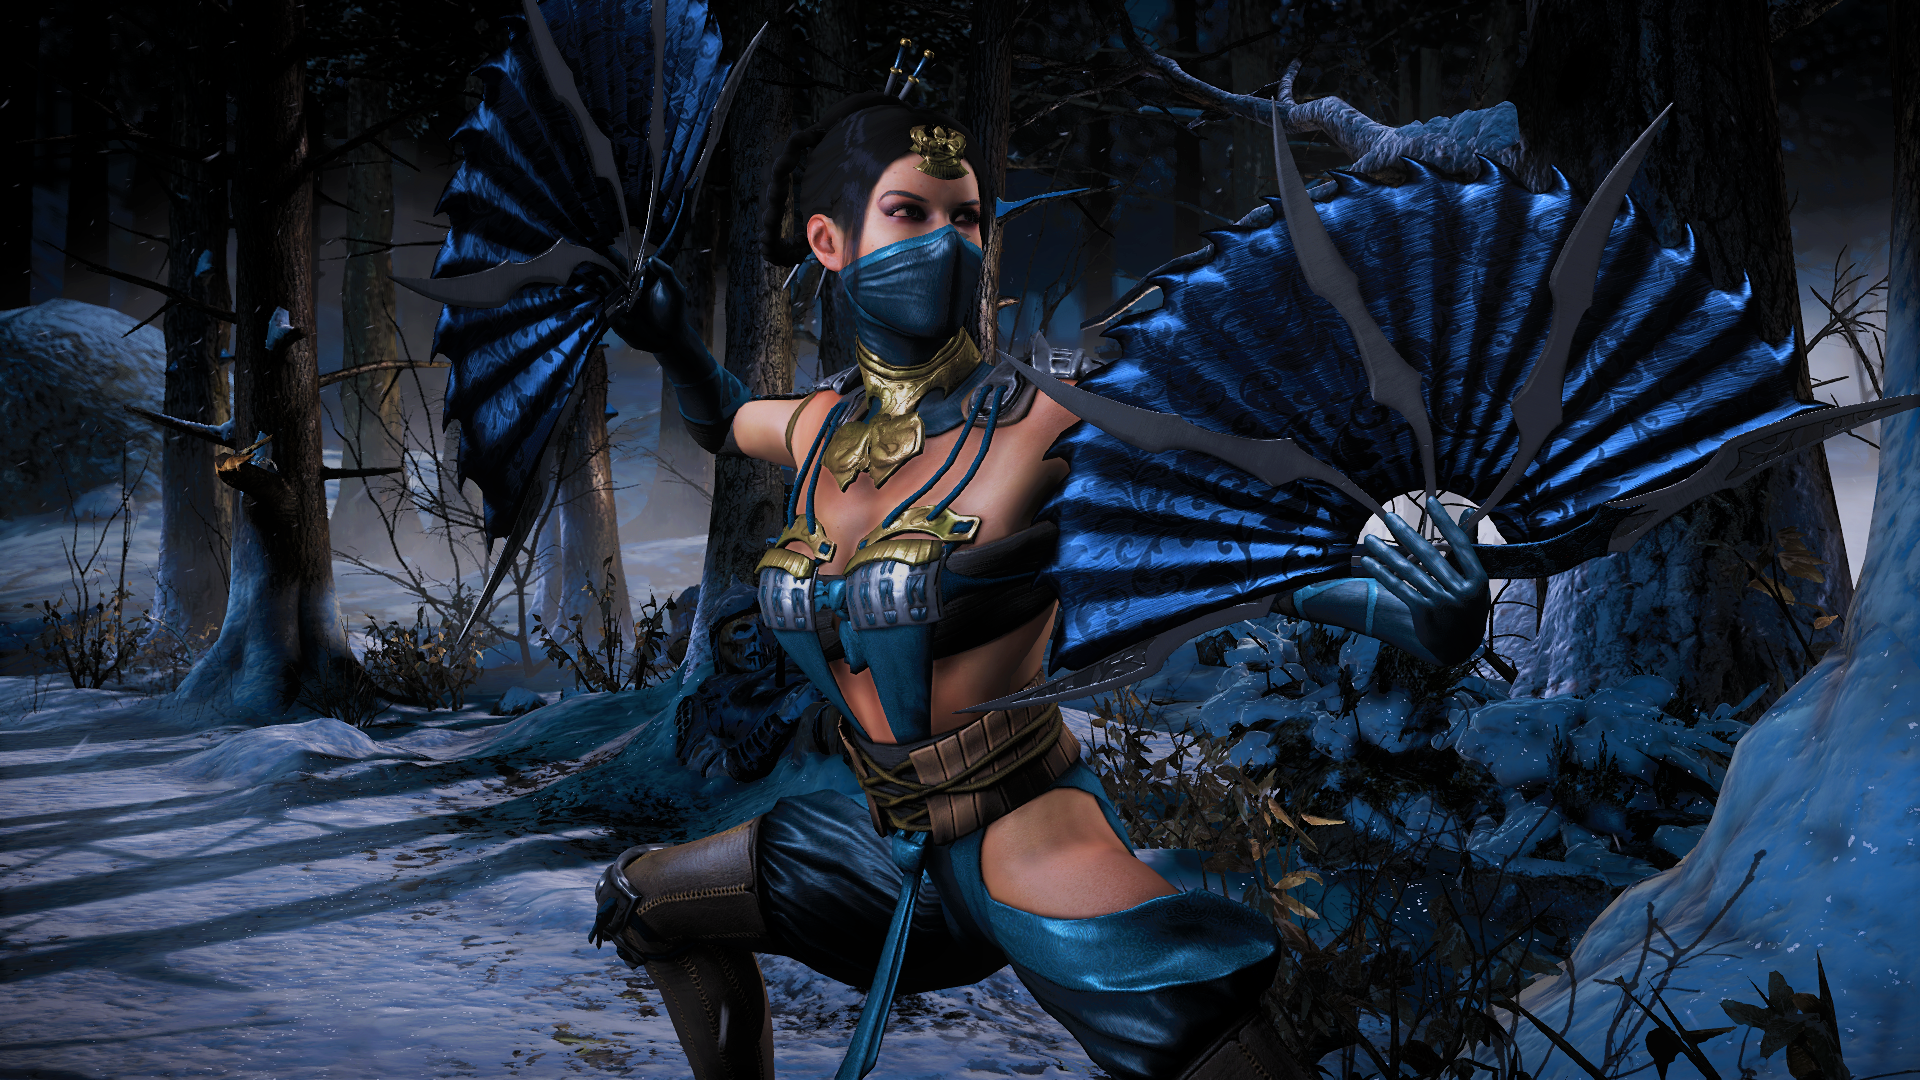 Here's some cool wallpapers of Kitana and Mileena from Mortal Komb...